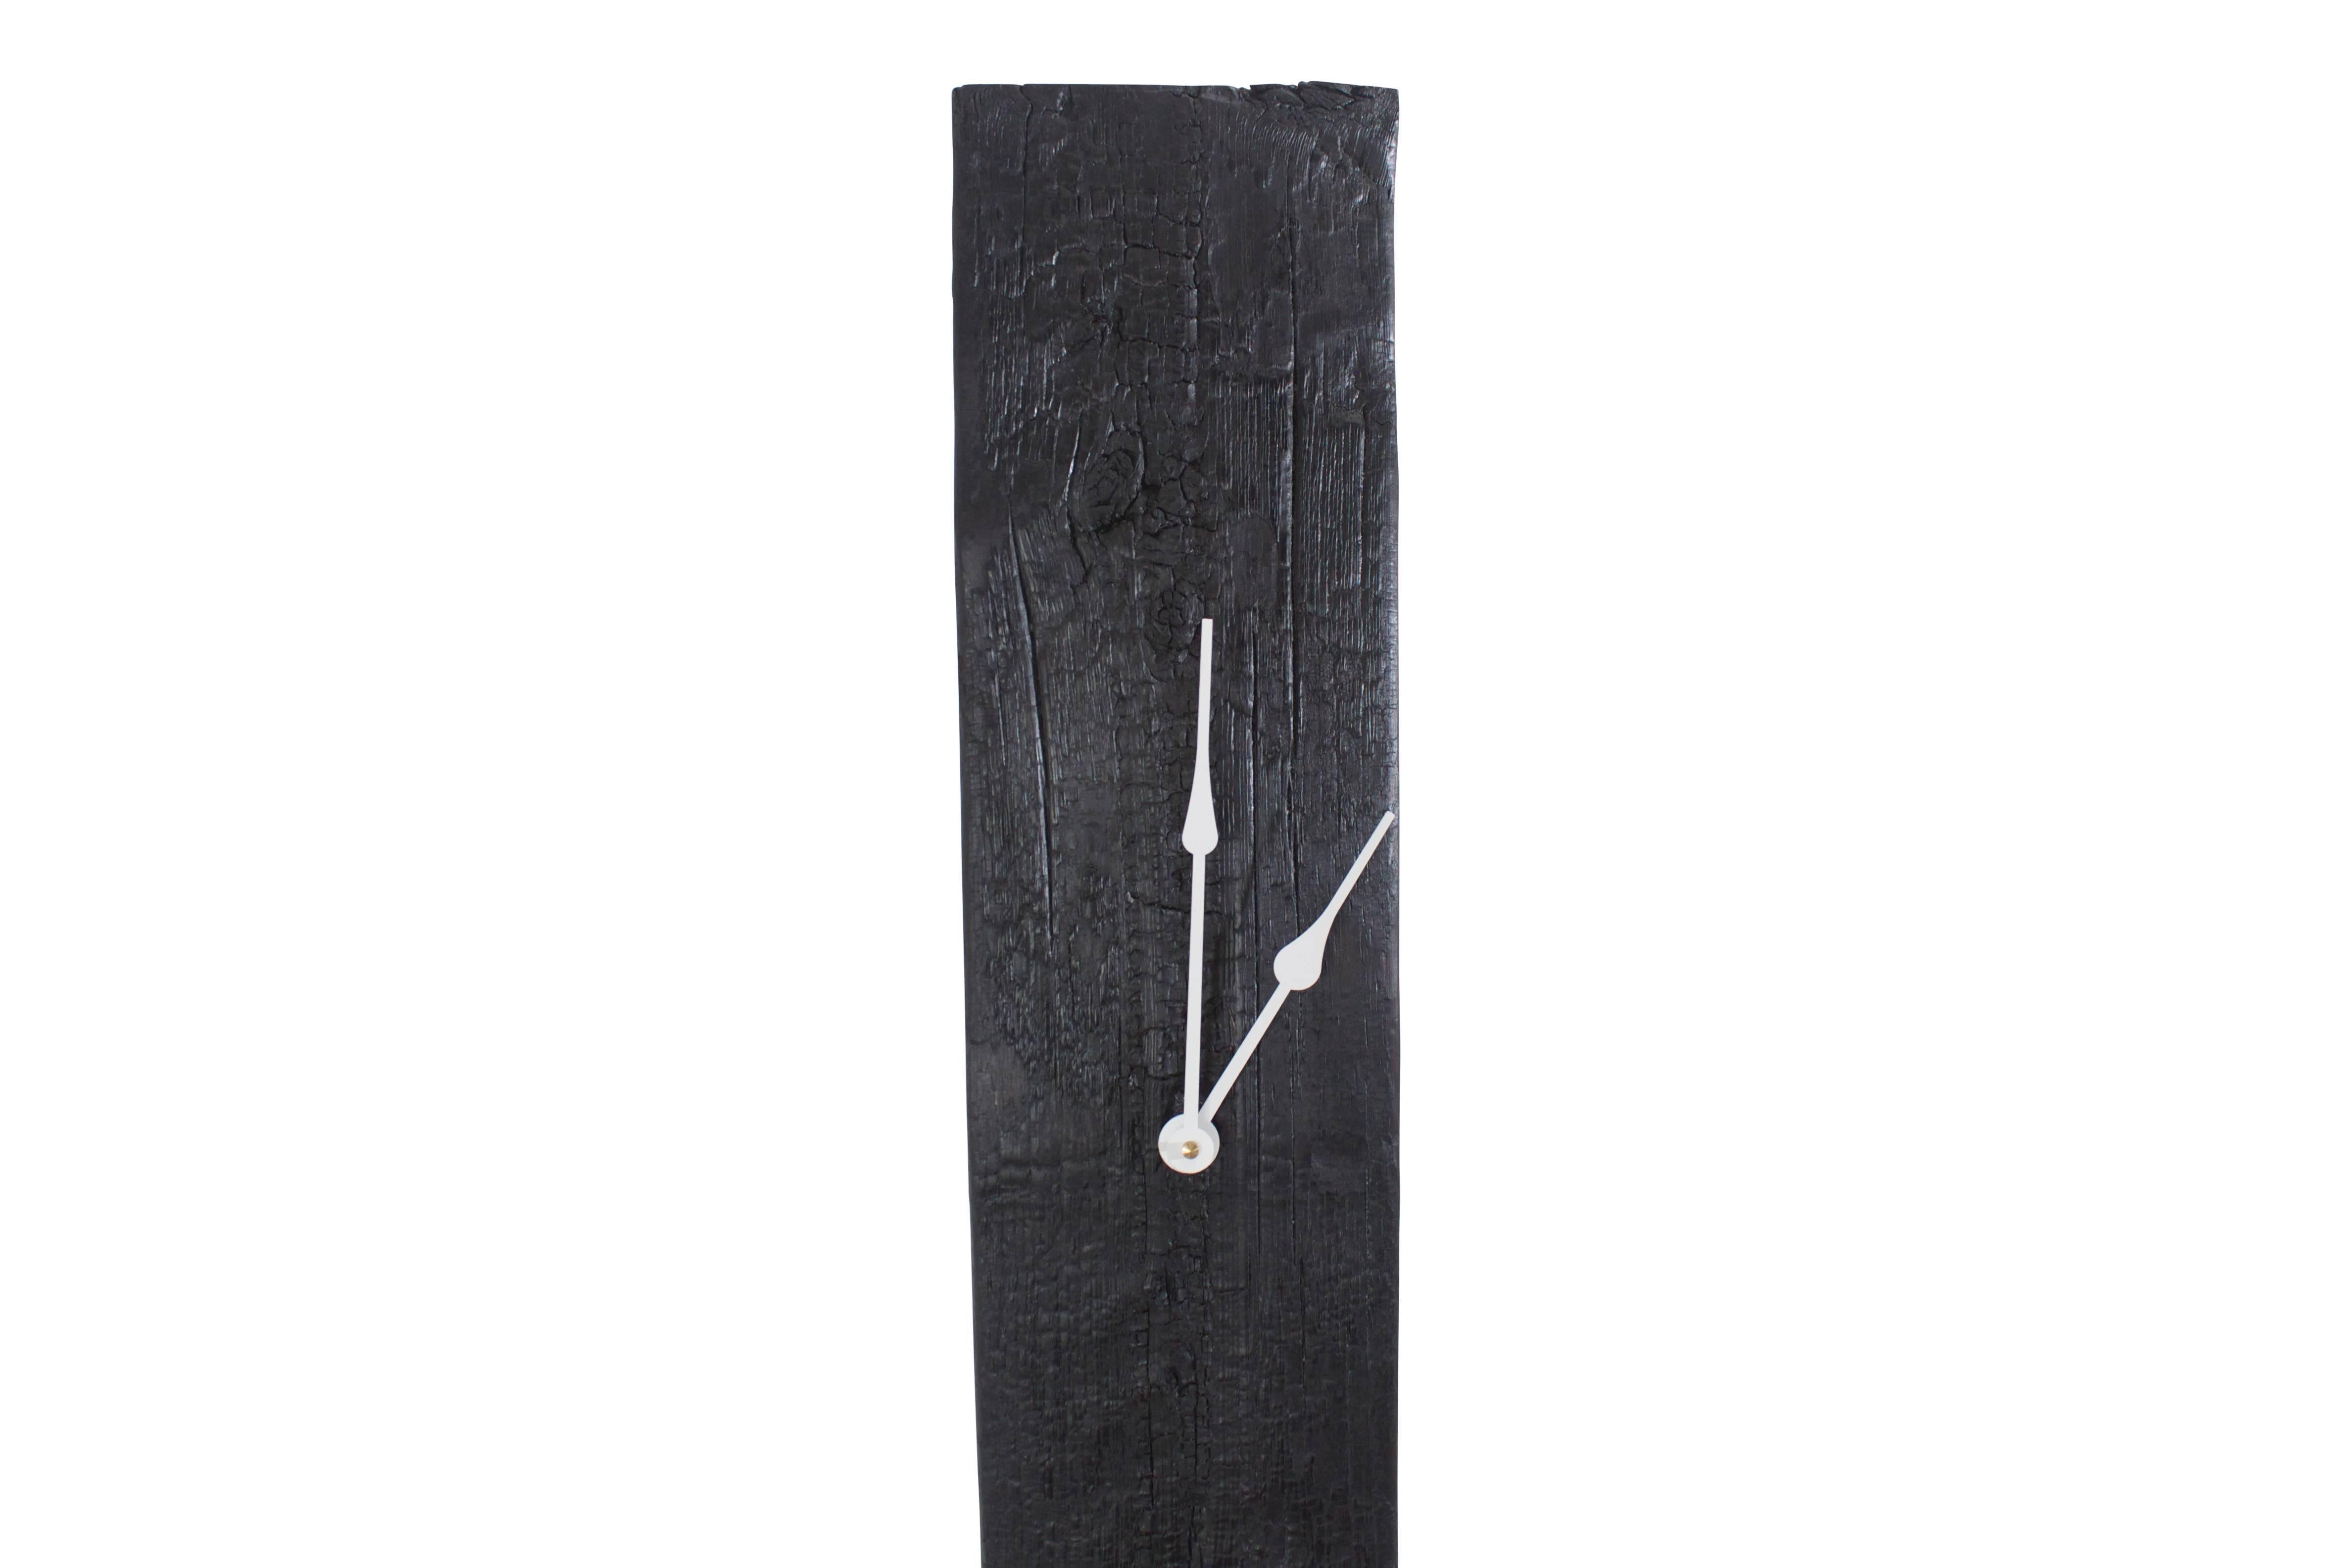 A sleek modern take on the grandfather clock. This piece is made from historic decommissioned NYC water tower wood. The wood is torched in the Shou Sugi Ban method and then sealed with oil to achieve its beautiful color and texture. The high-torque